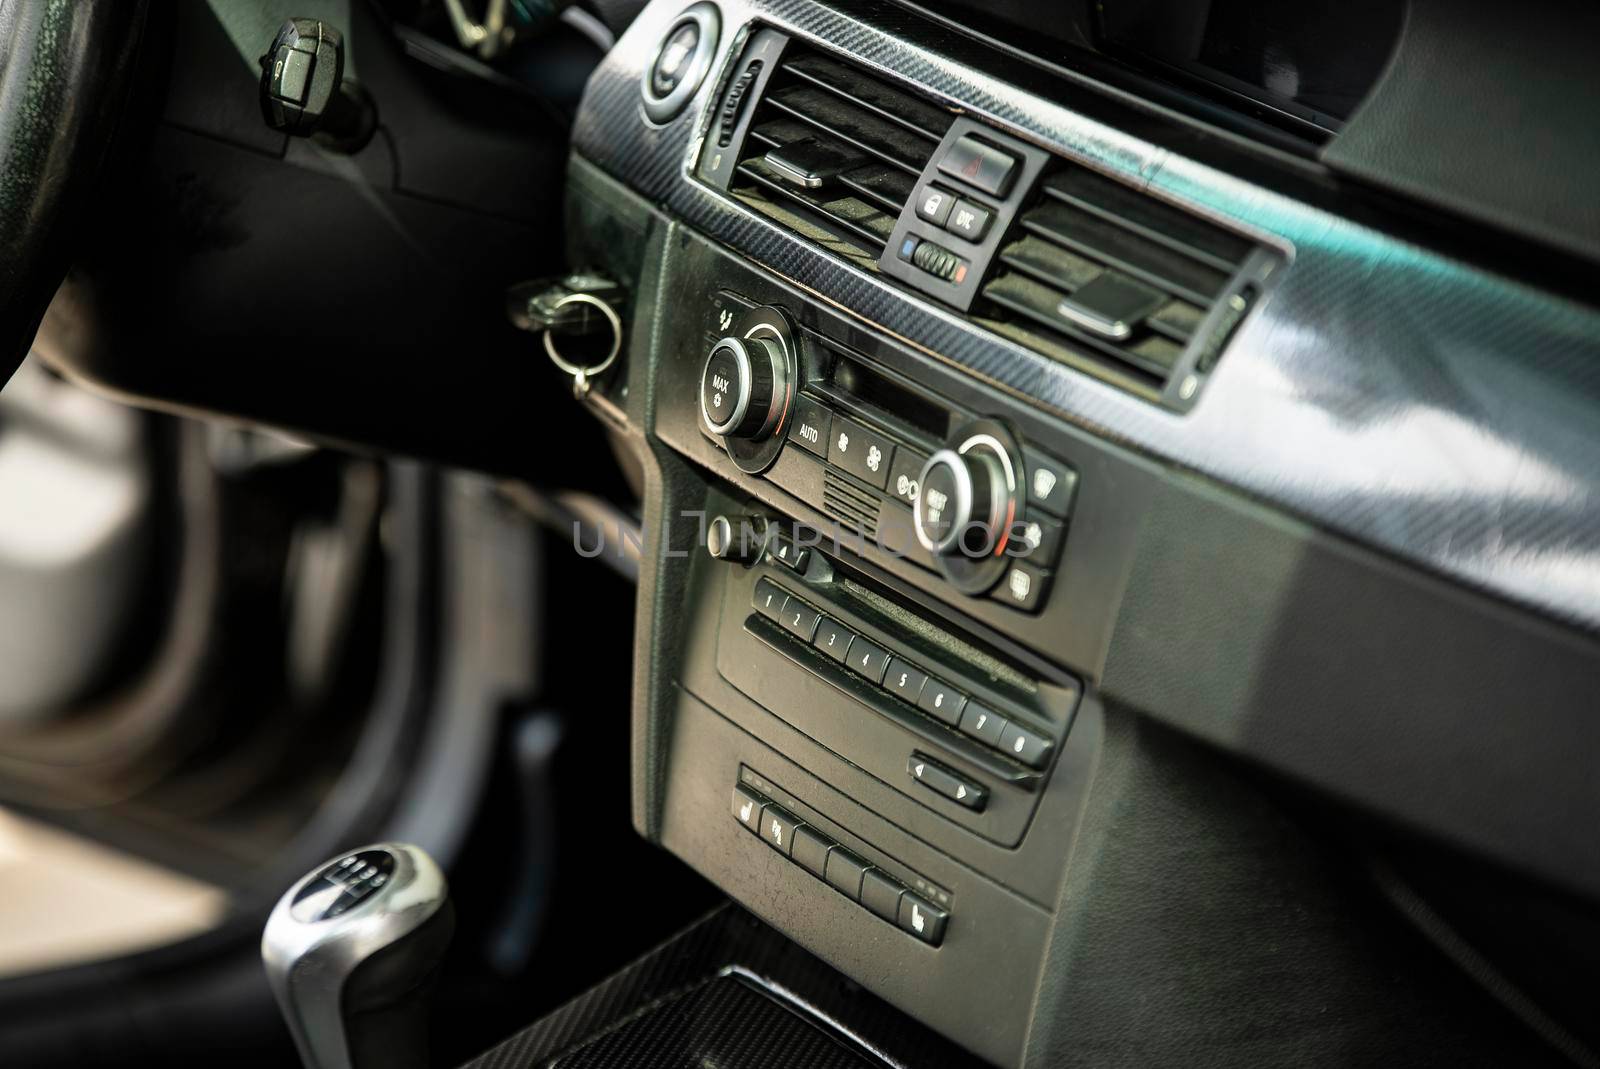 Detail of Center console of the car